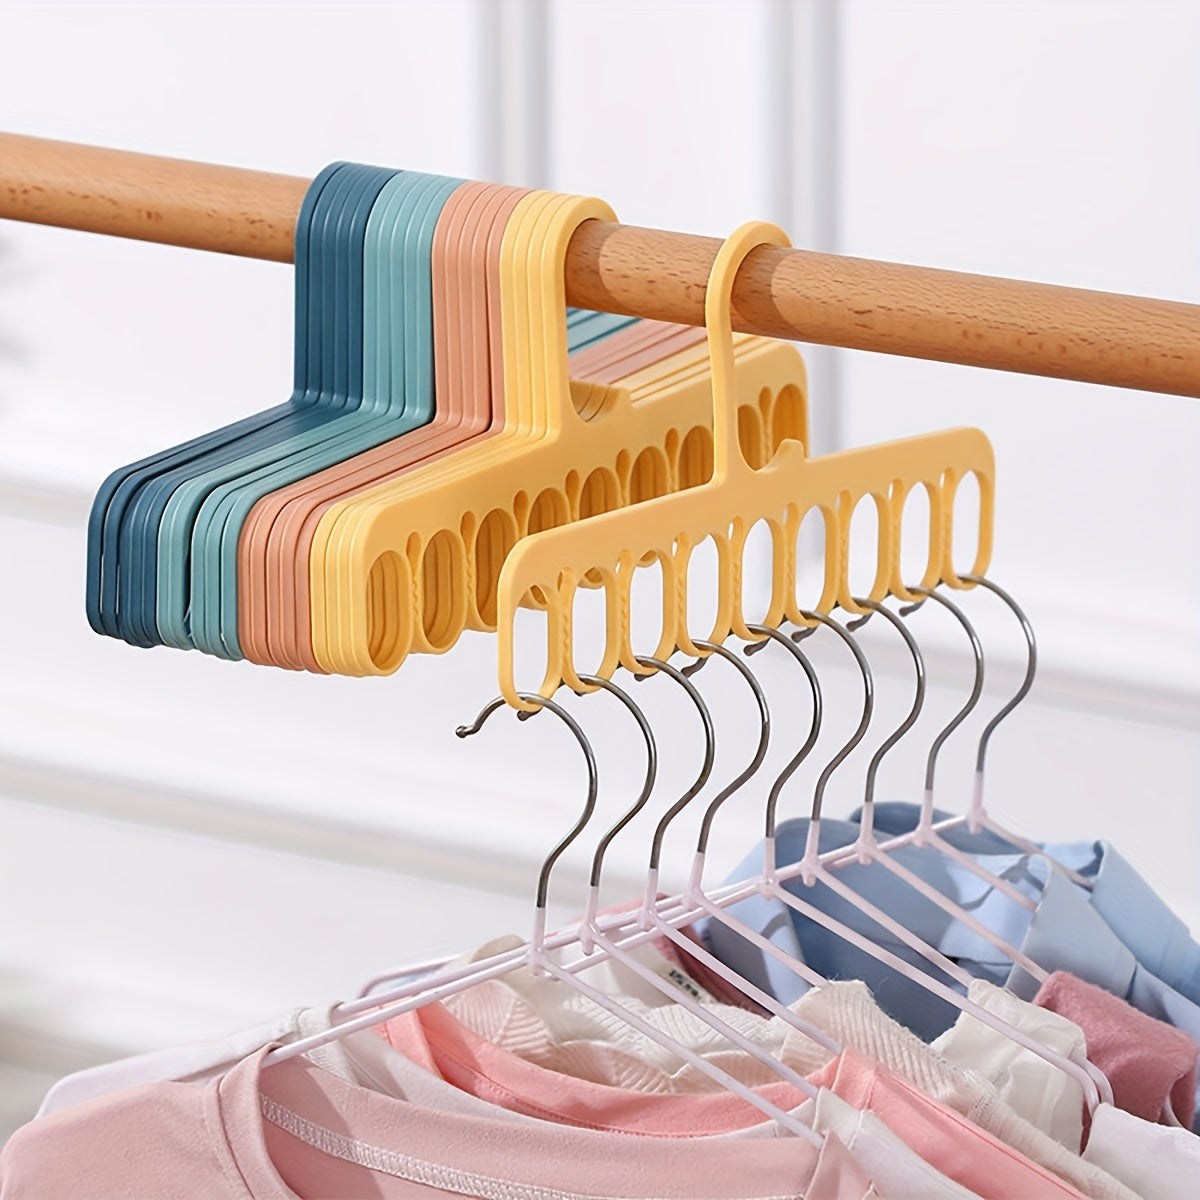 1pc Multi-Port Sock Clip Hanger, Clothes Support, Clothes Drying Rack, Multifunction Plastic Sock Storage Hangers, Household Space Saving Organizer, Wardrobe Organizer, Closet Organizer, Bedroom Accessories, Home Organization And Storage Supplies